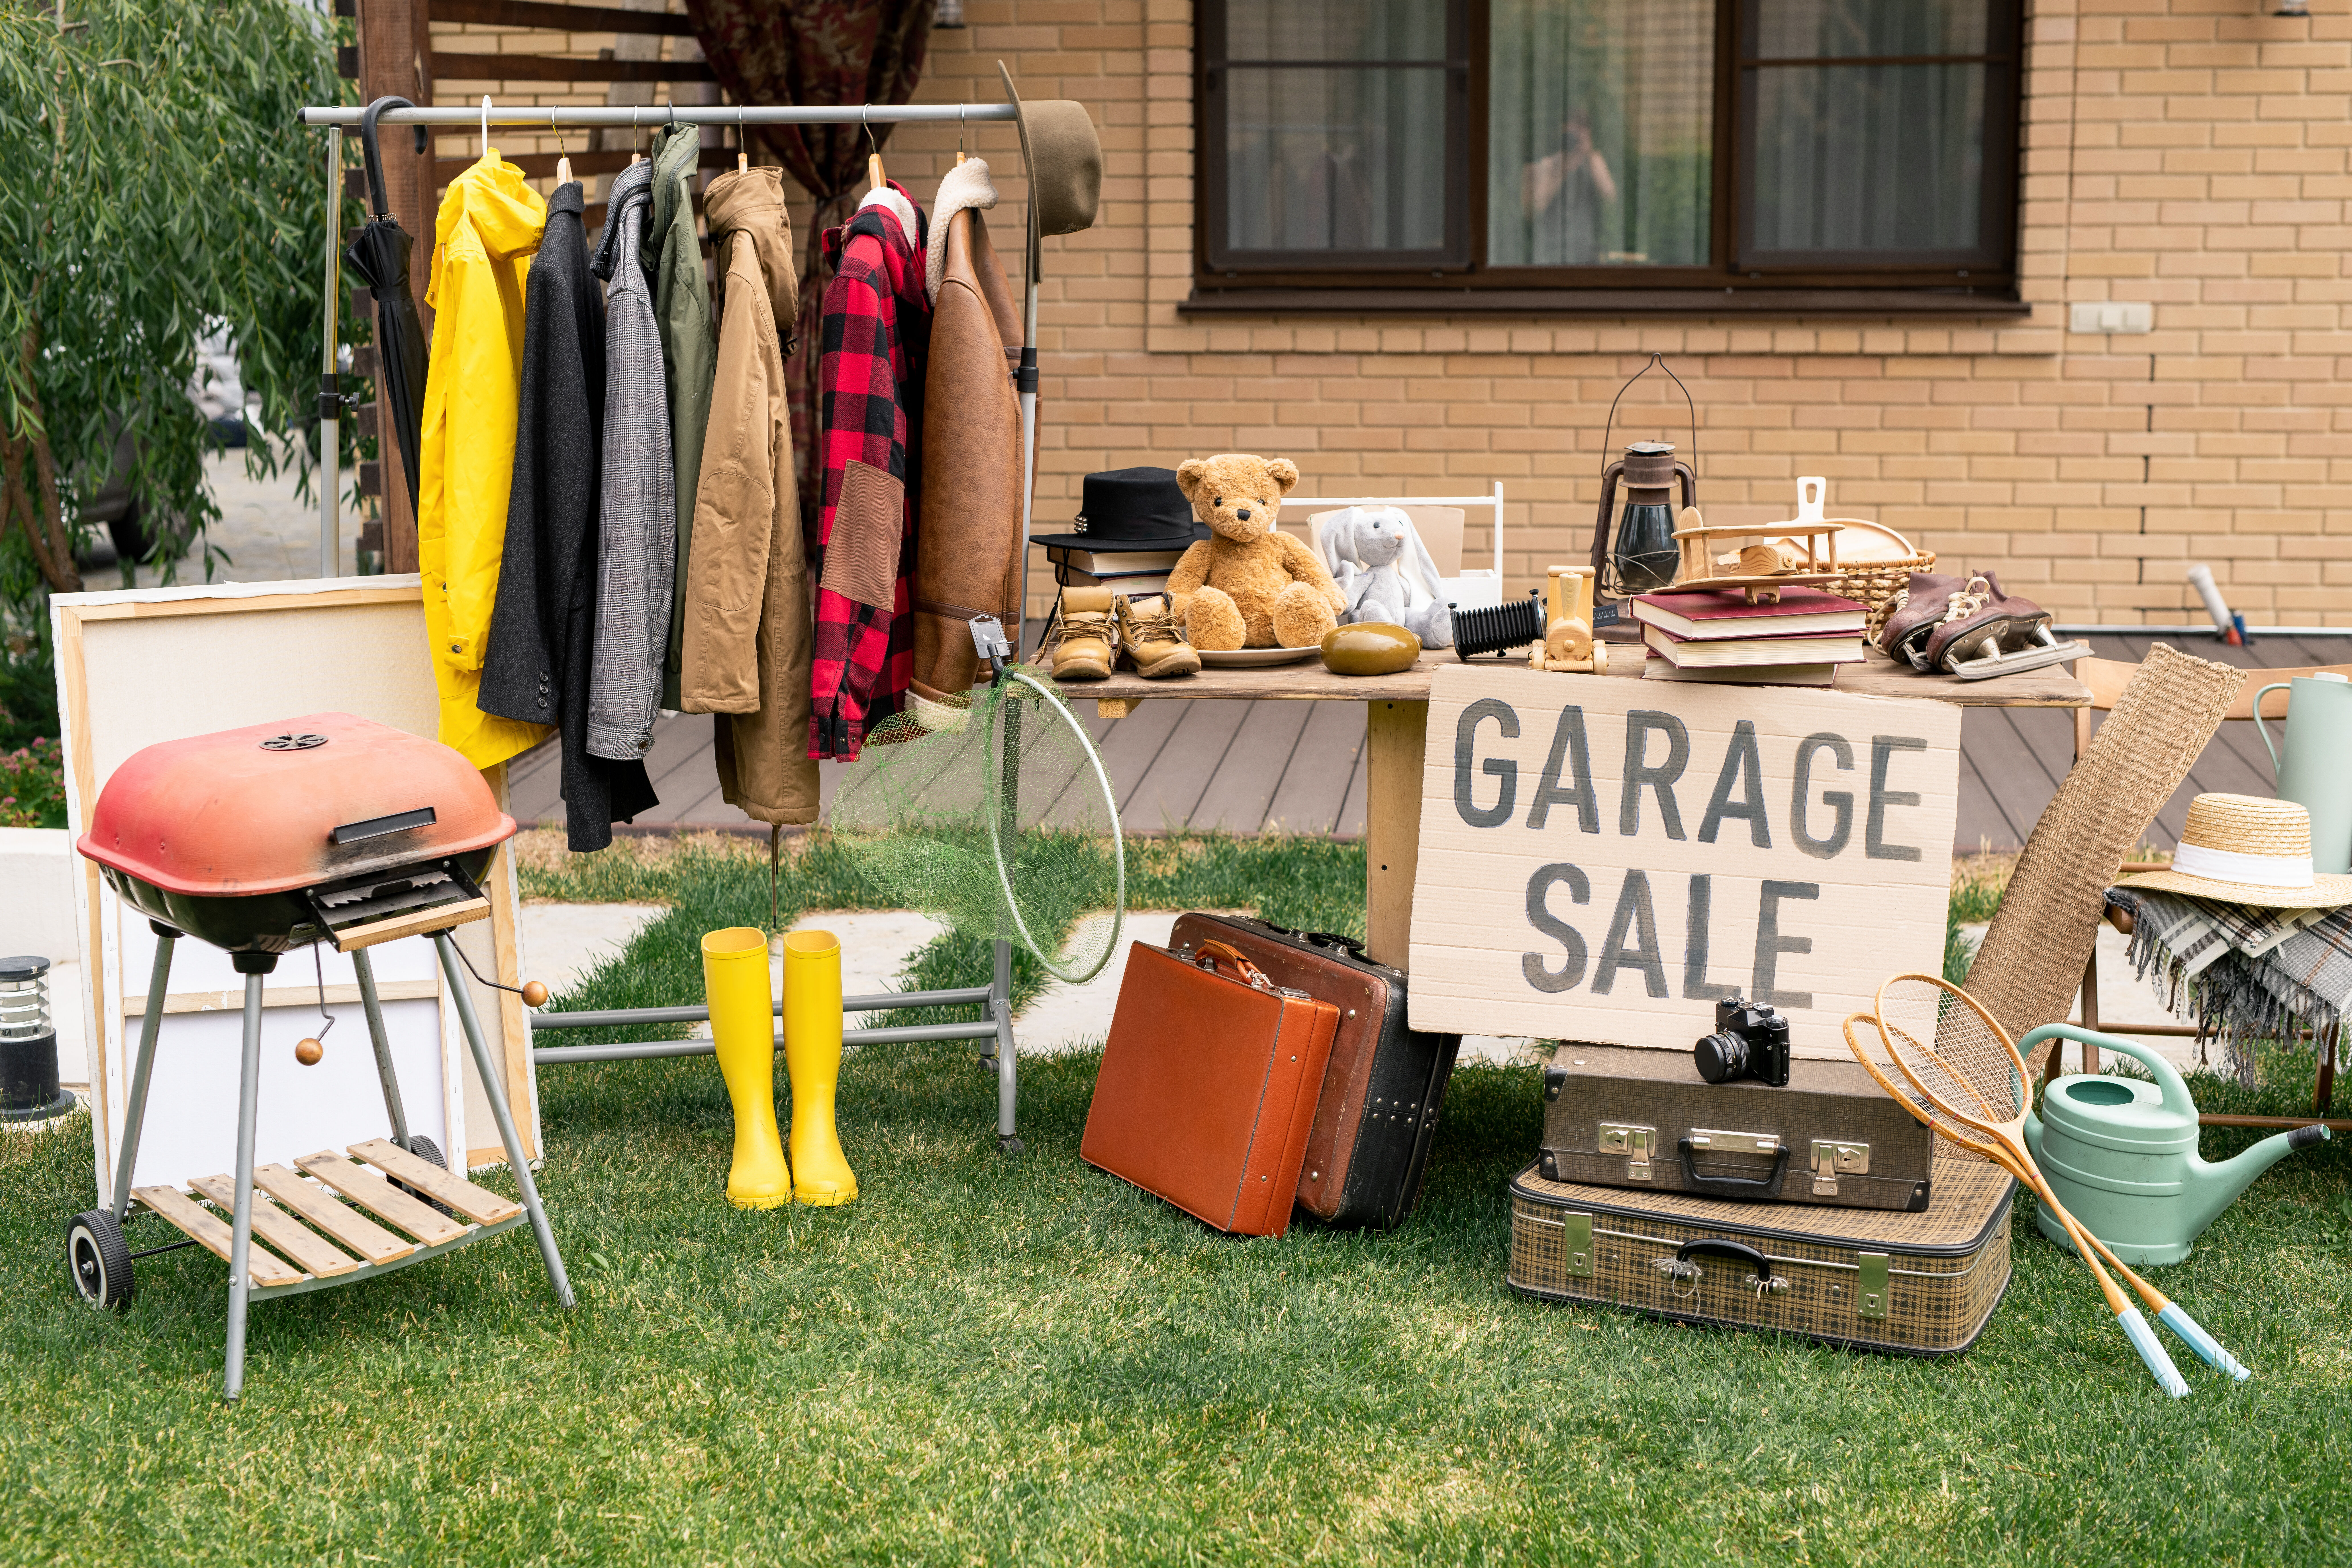 How buying secondhand or used items can help save the environment